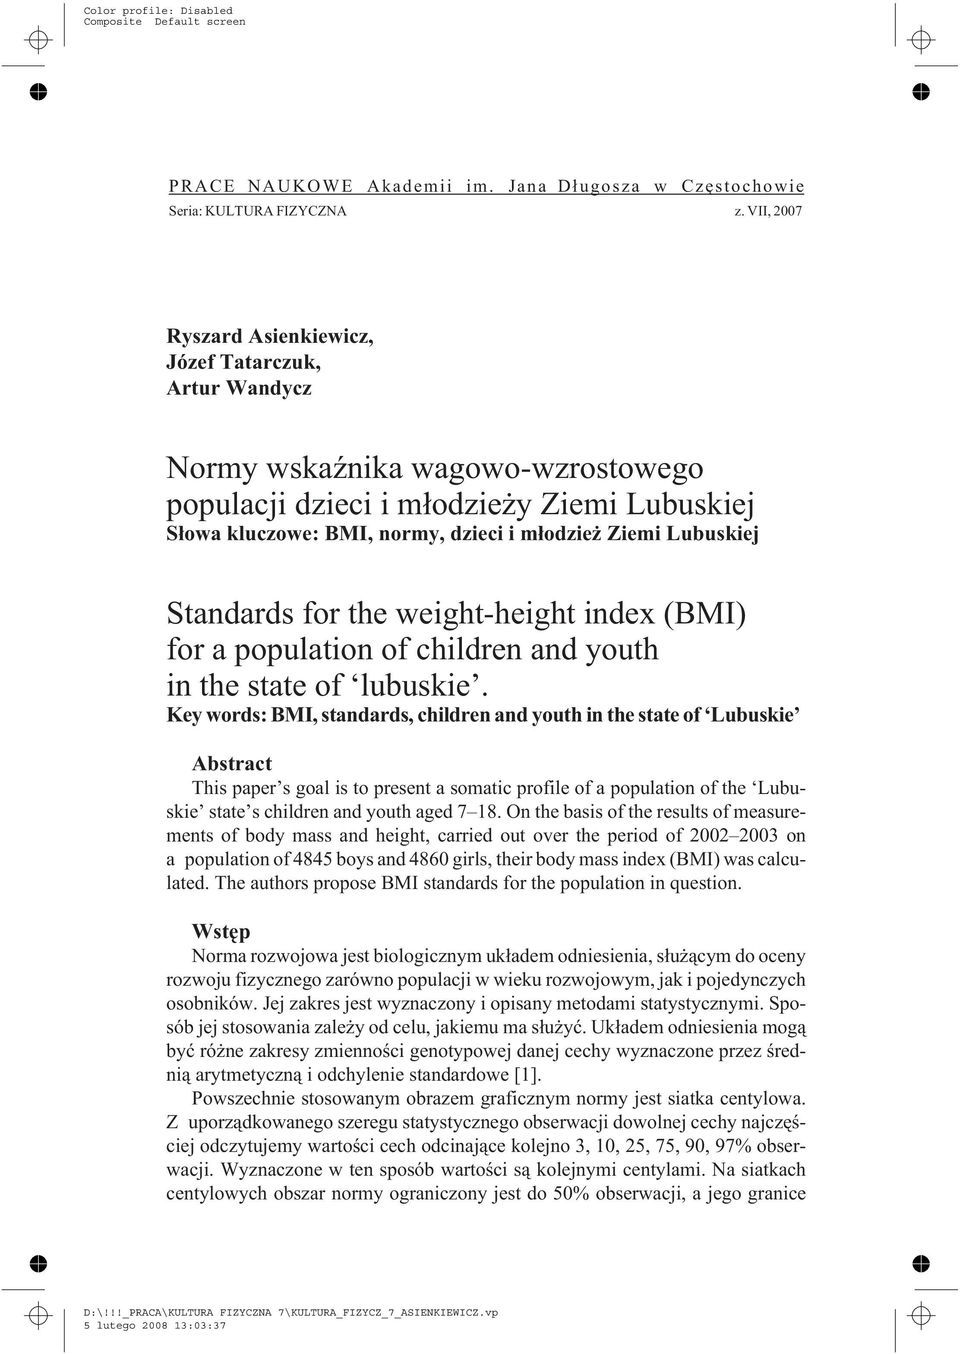 Lubuskiej Standards for the weight-height index (BMI) for a population of children and youth in the state of lubuskie.